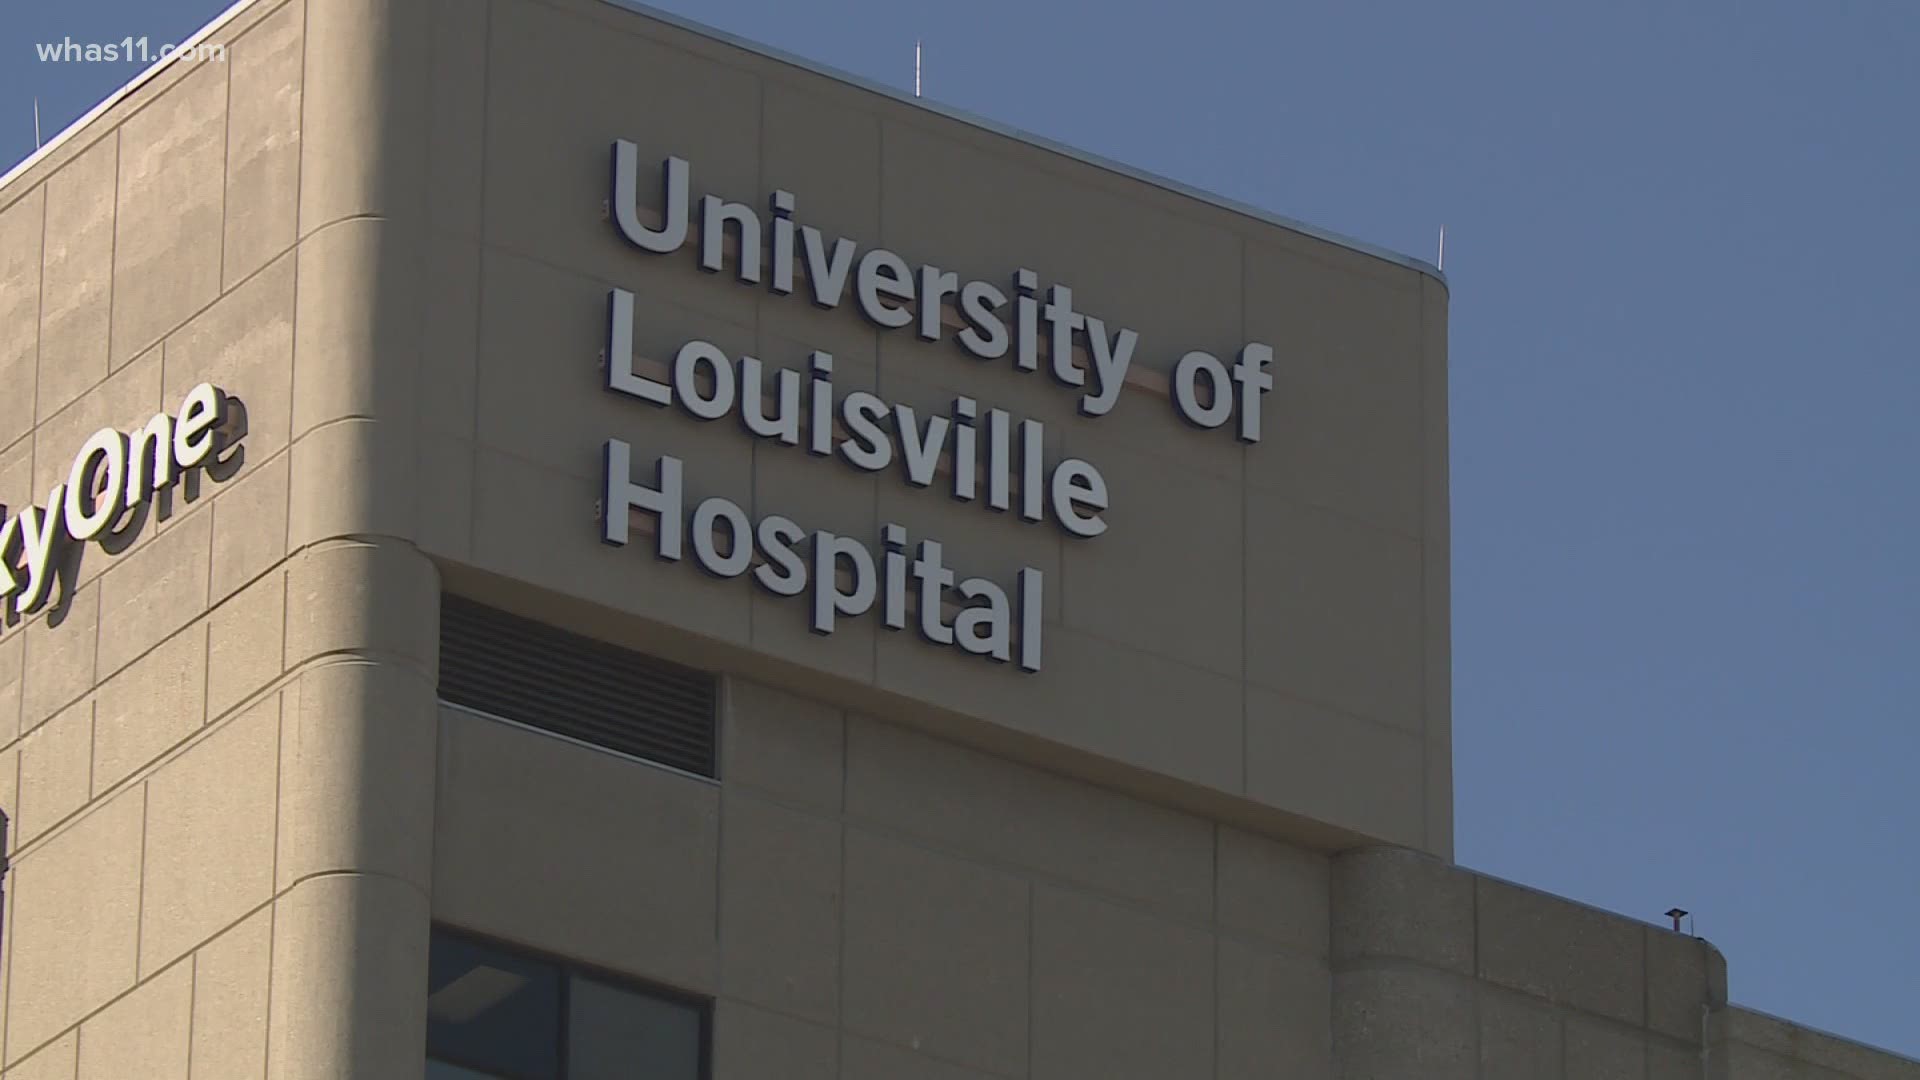 University of Louisville Health announced a revision to its temporary visitor policy at all facilities to allow one visitor per patient.